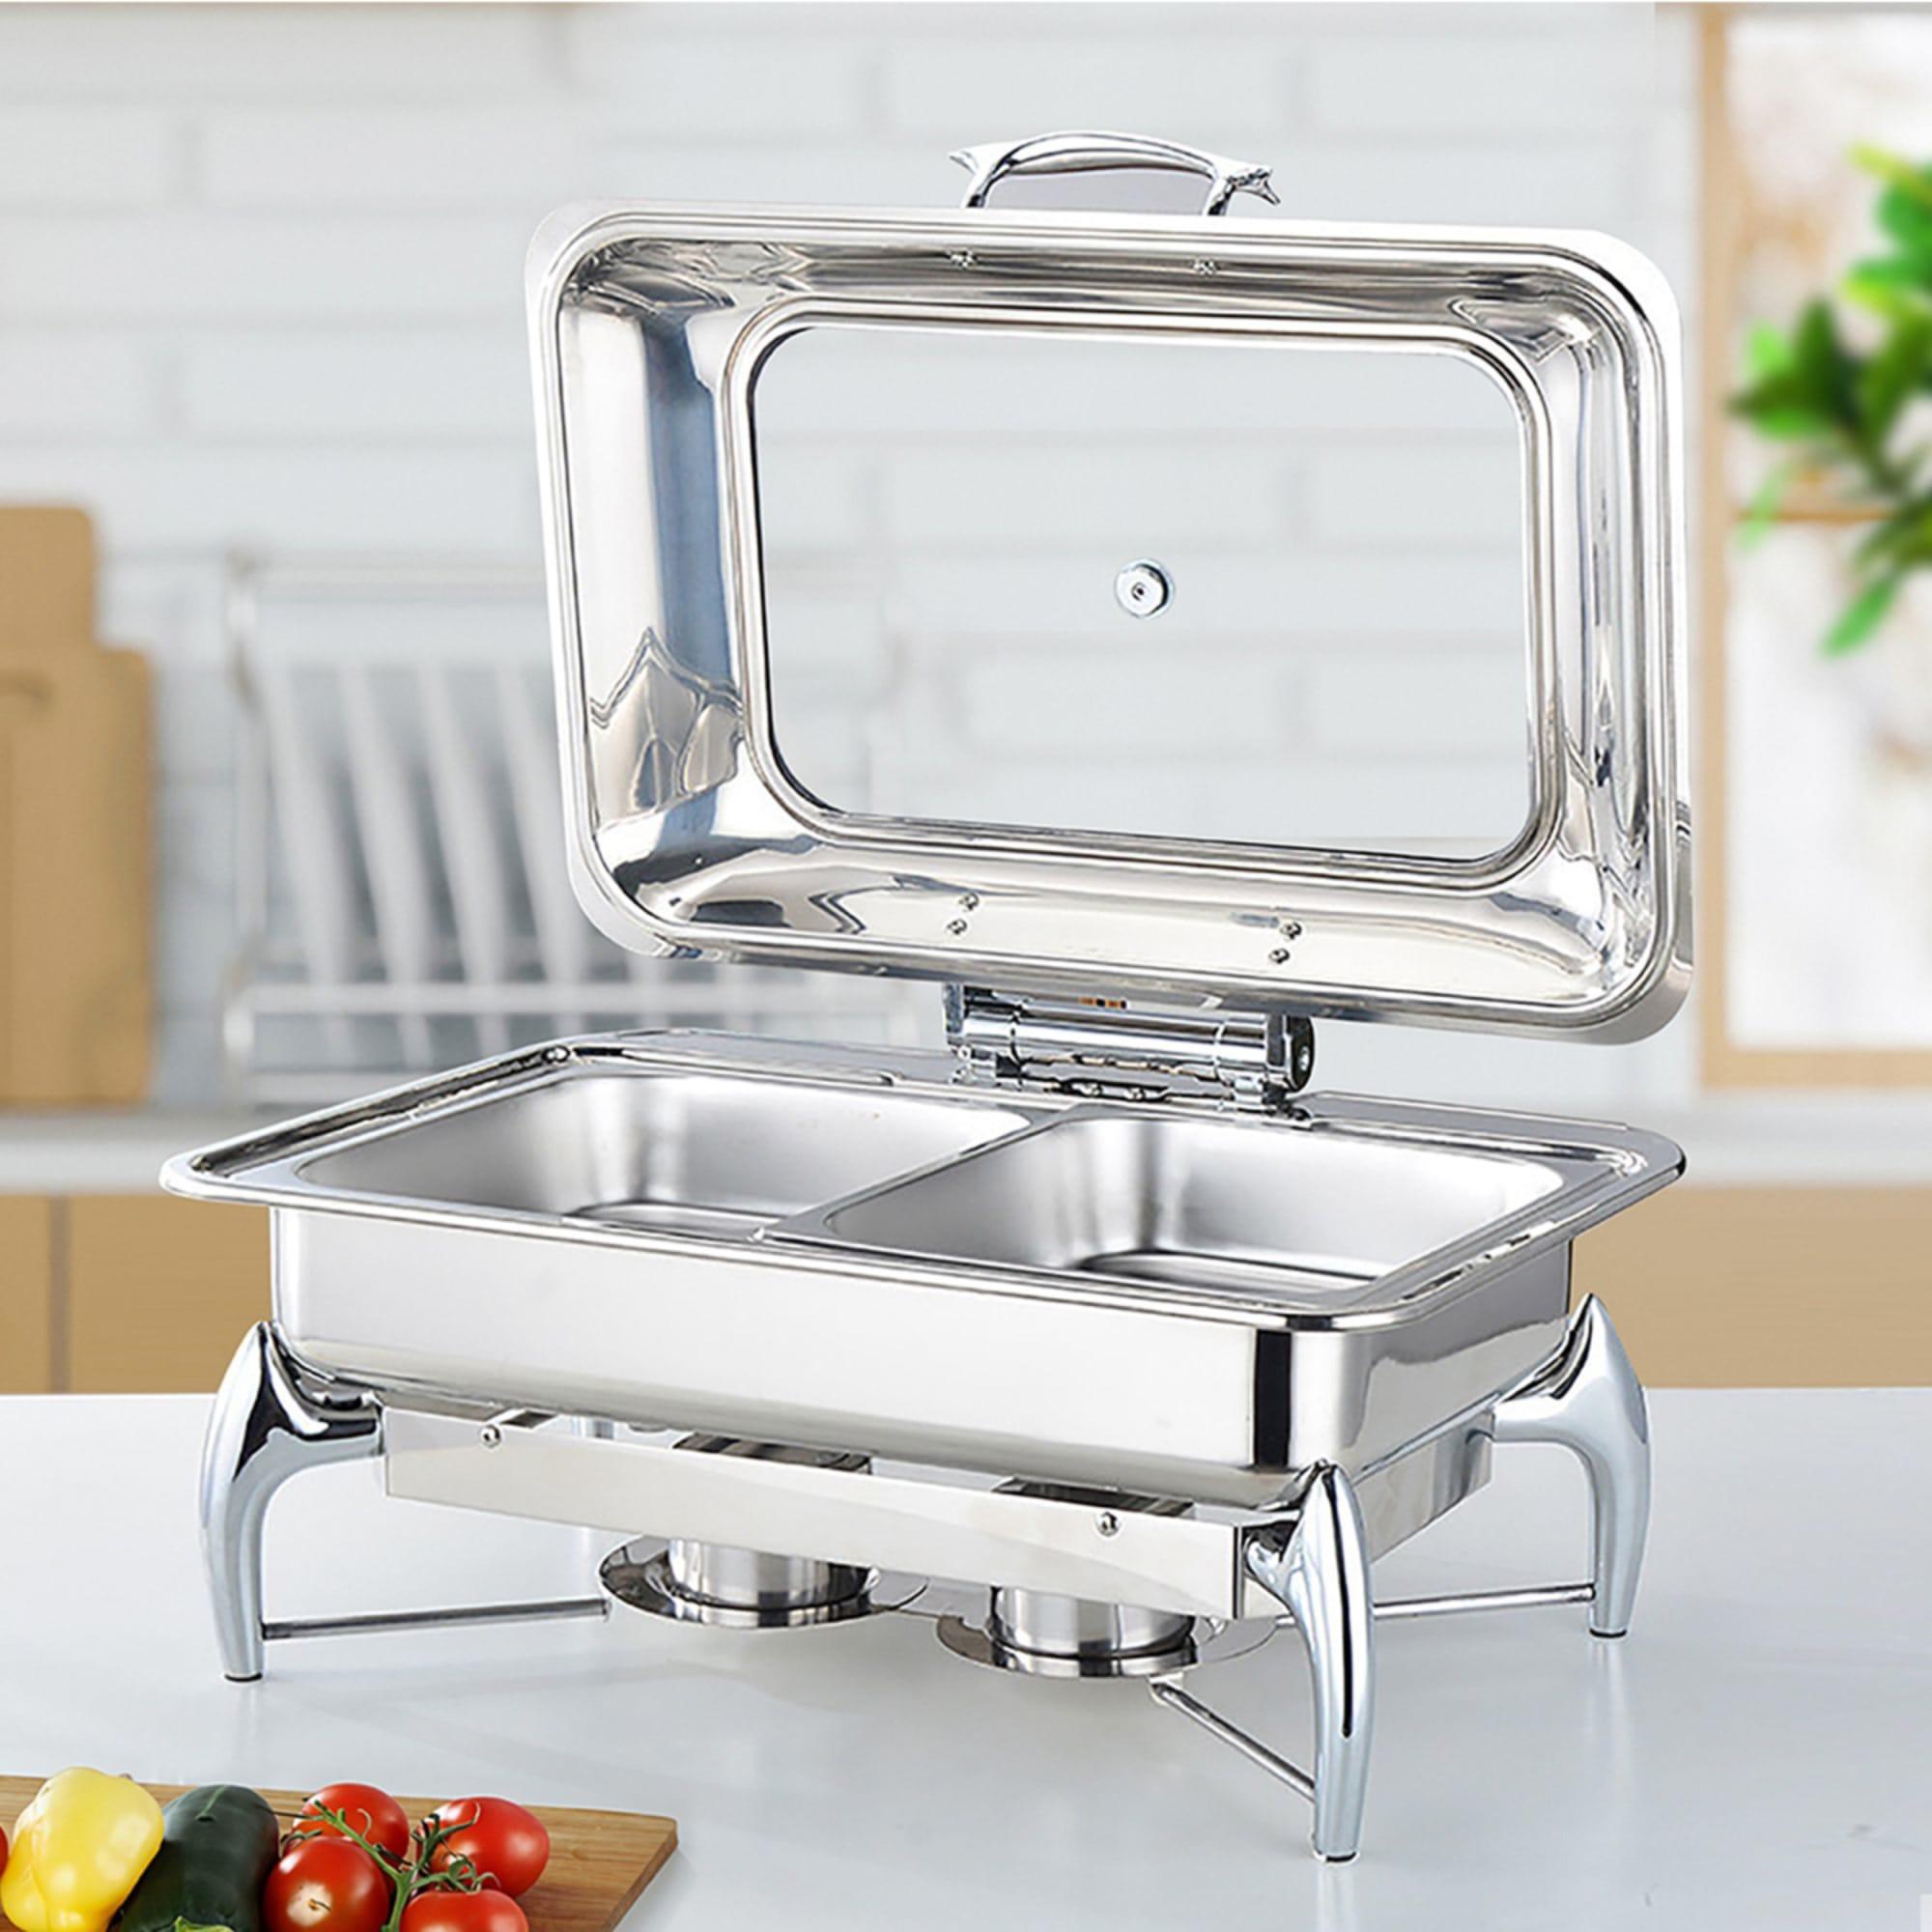 Soga Rectangular Stainless Steel Chafing Dish with Top Lid Set of 2 Image 4